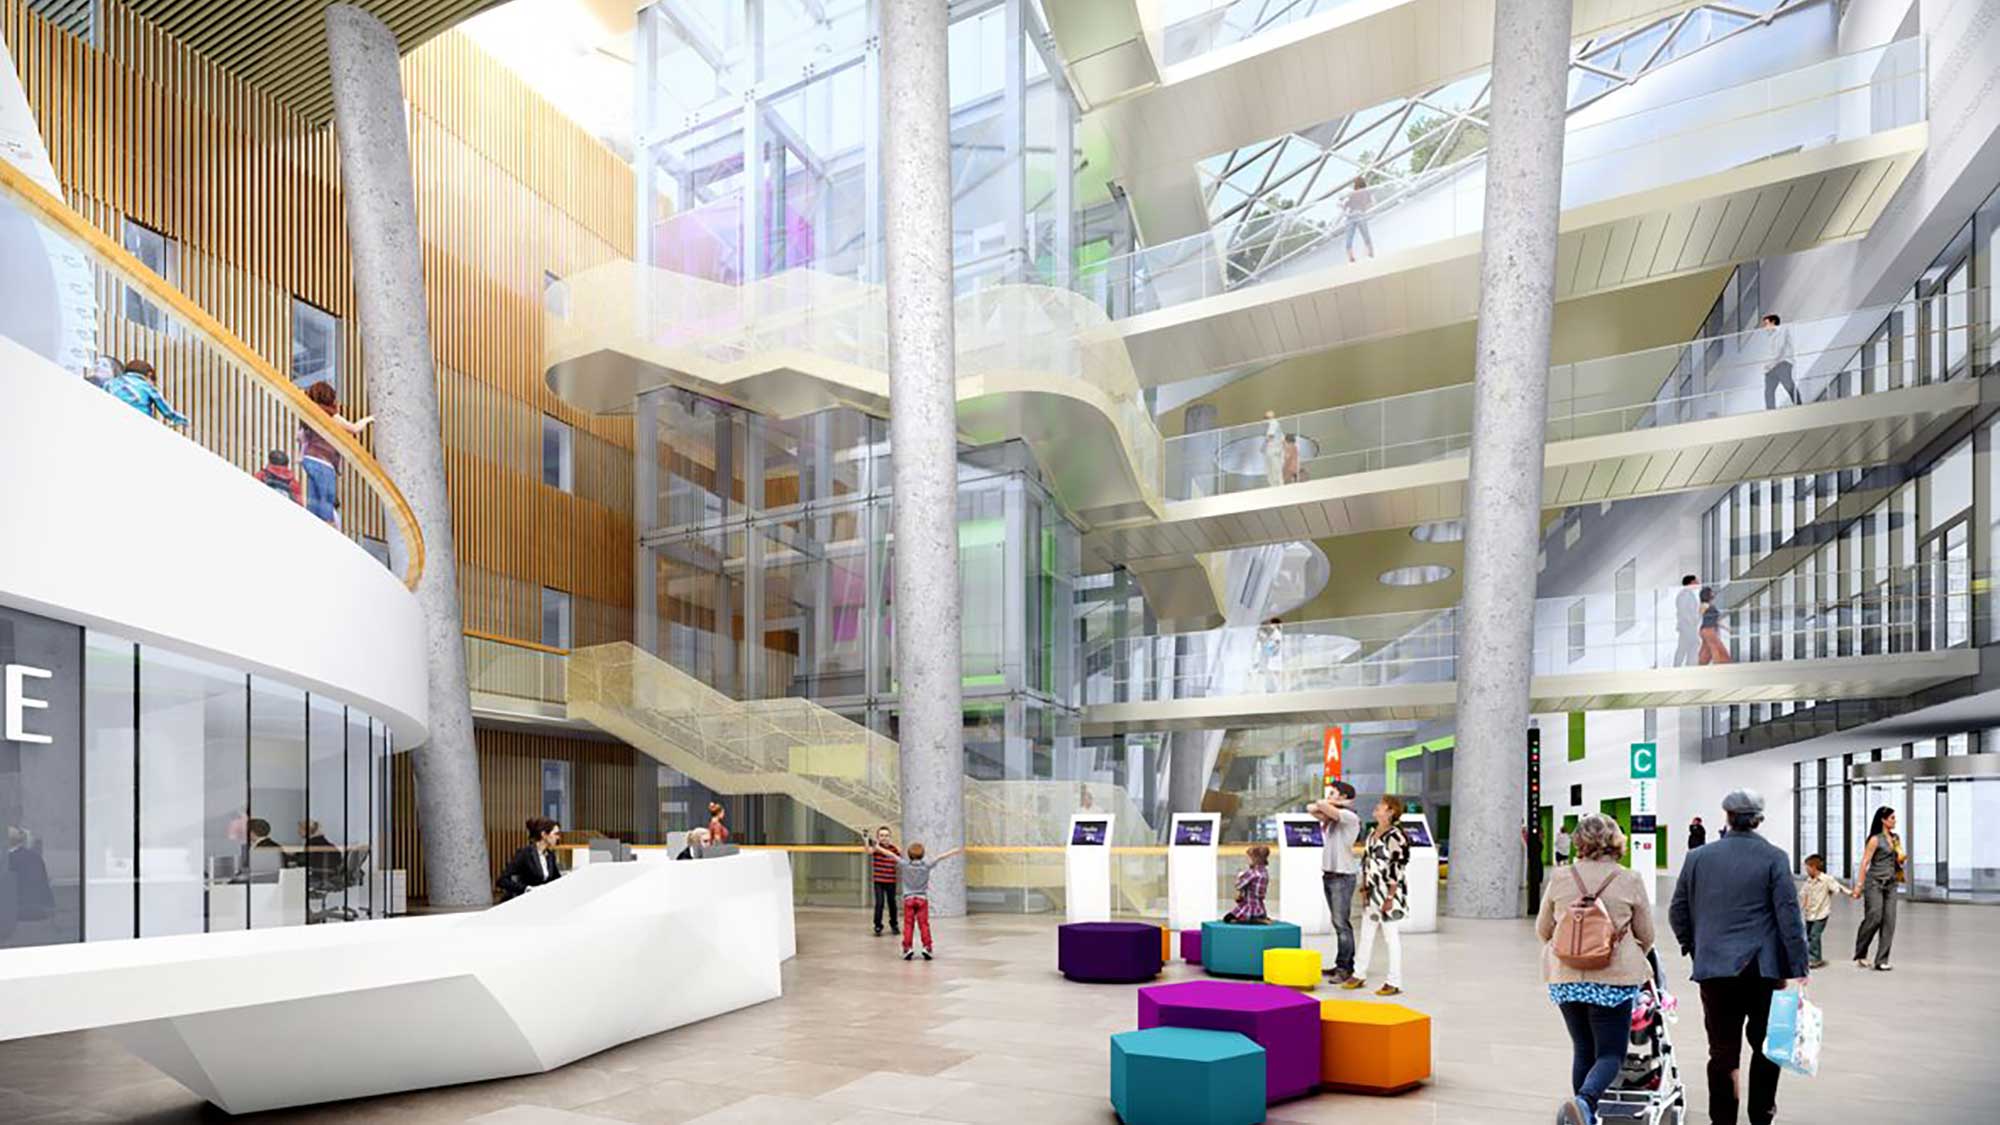 Photomontage of the atrium of Ireland's new children's hospital, showing people in the reception area and on the upper floors in the background.